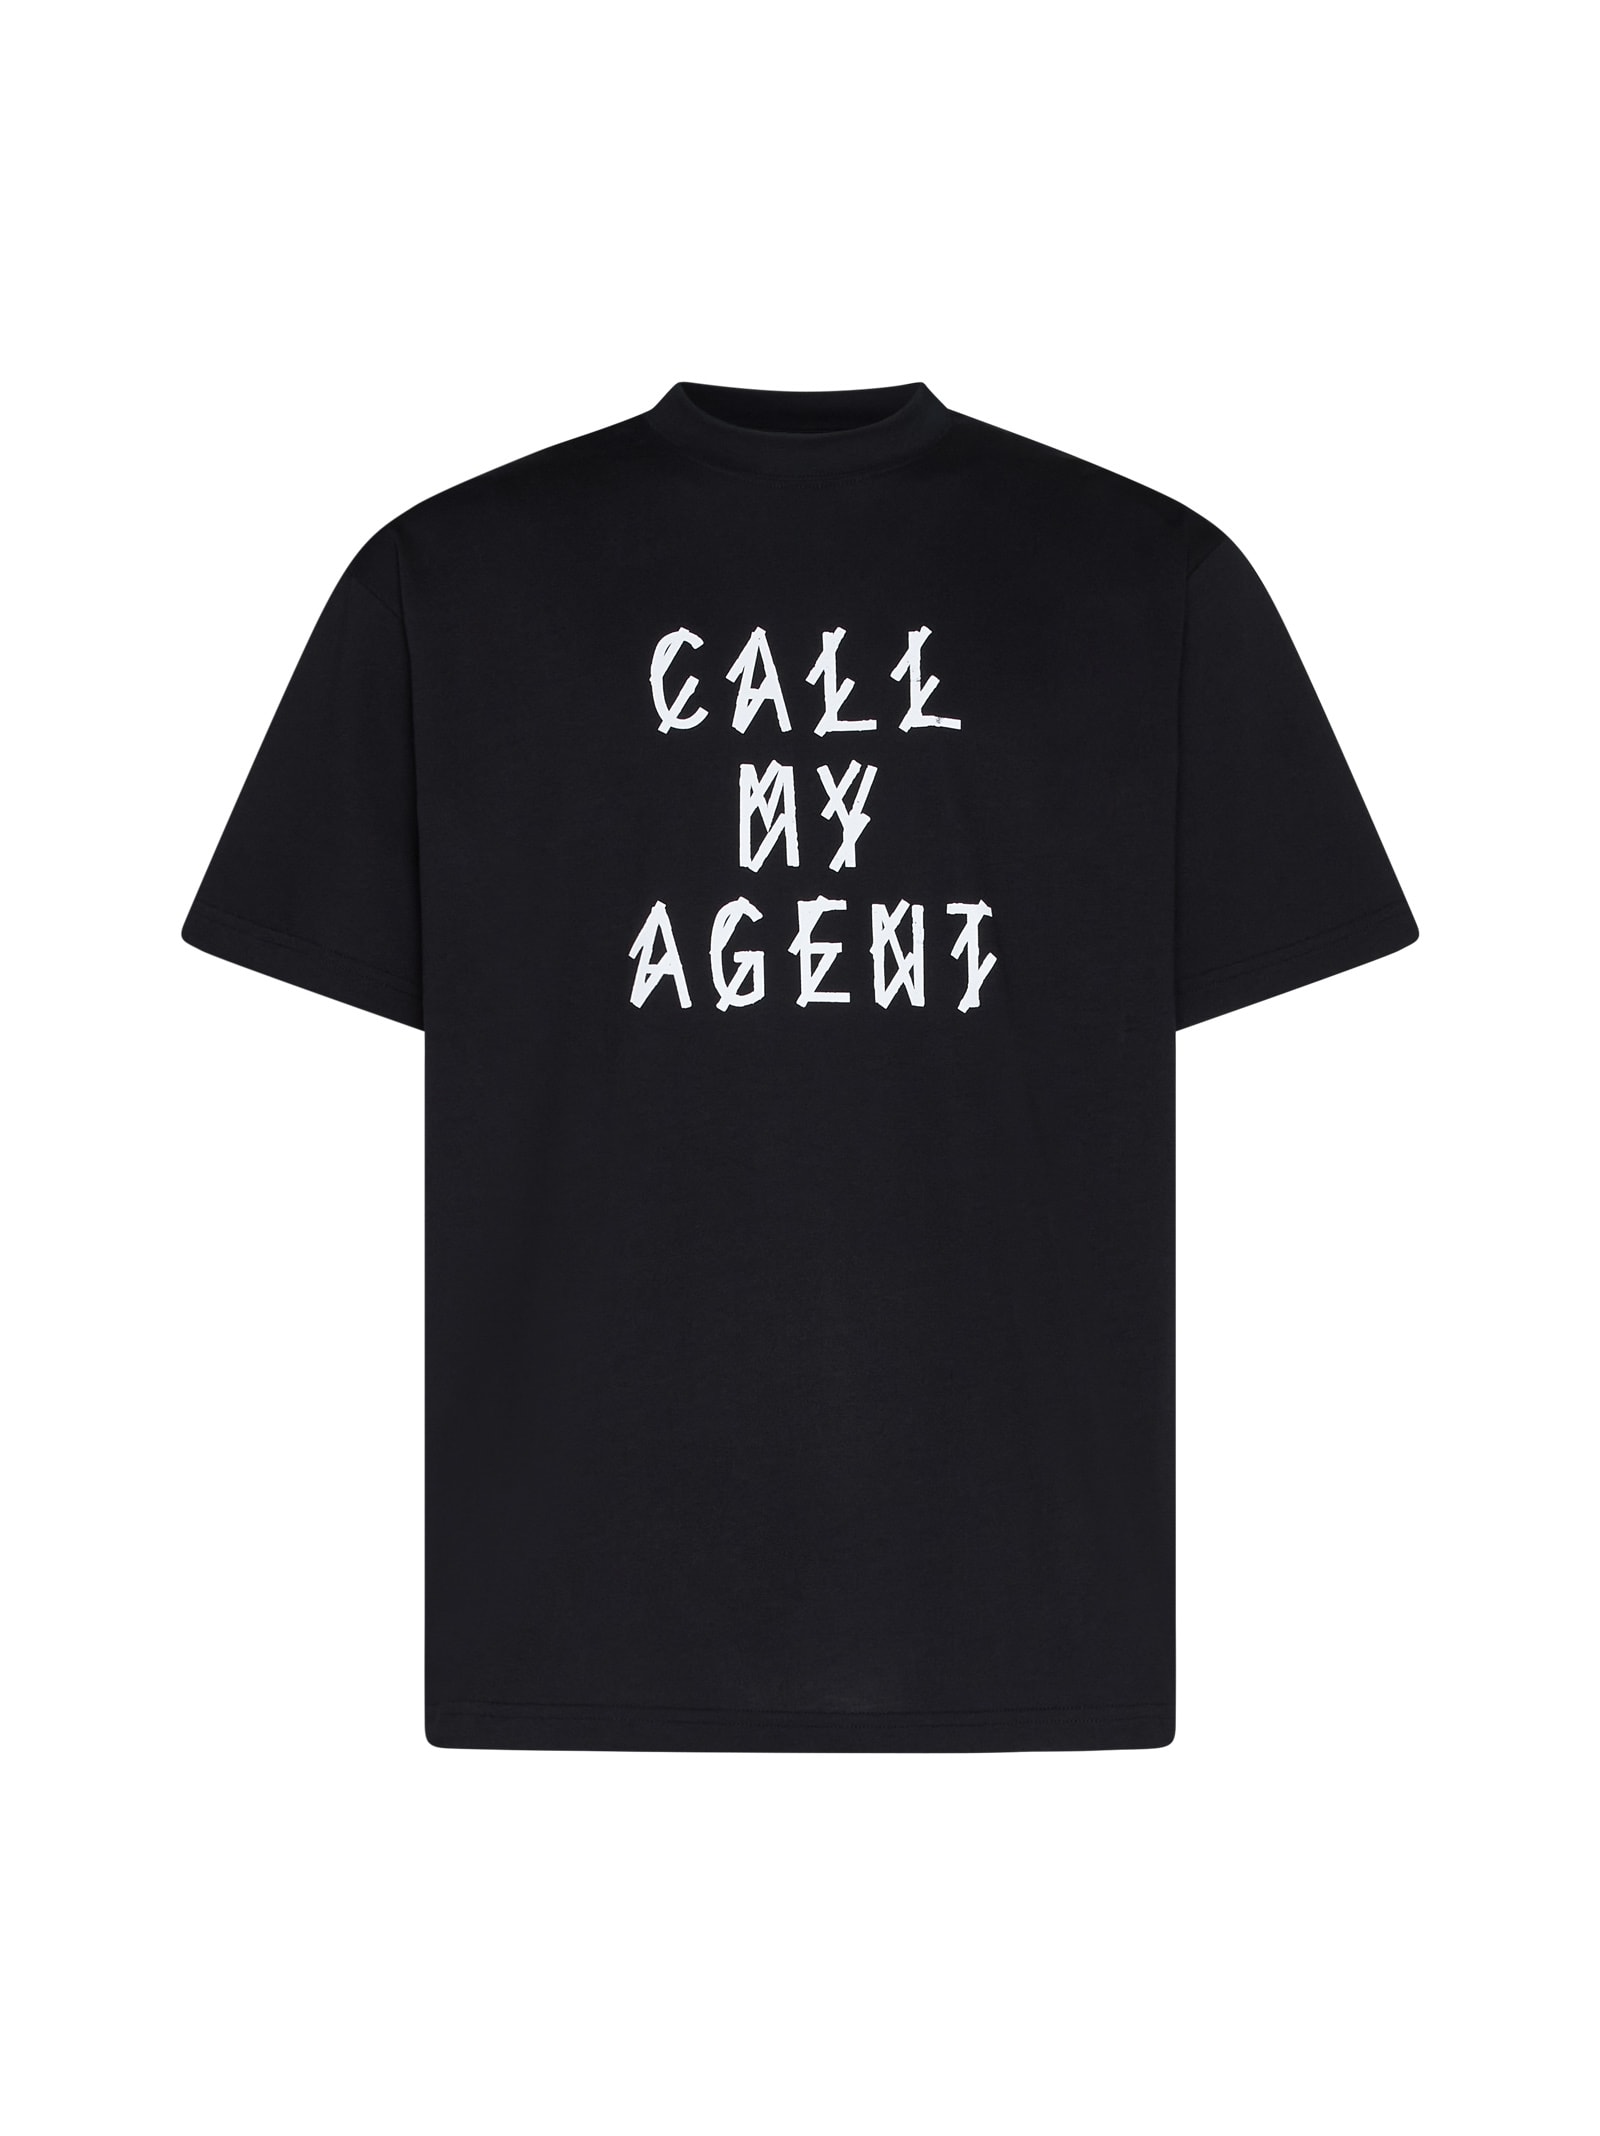 44 Label Group T-shirt In Black+call My Agent